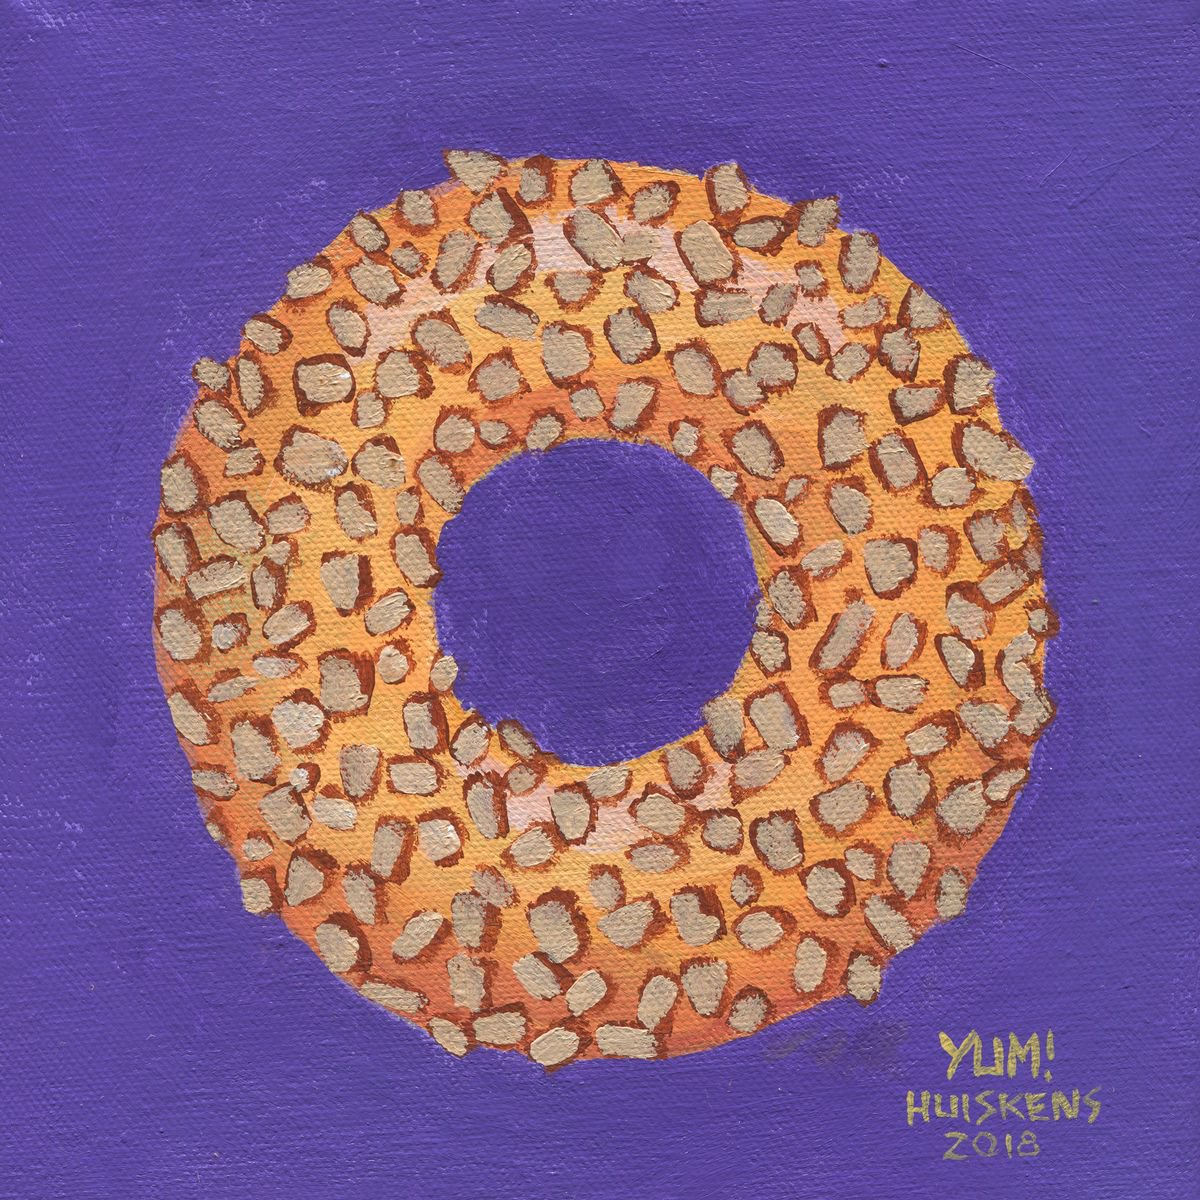 Donut No. 8 by Randal Huiskens